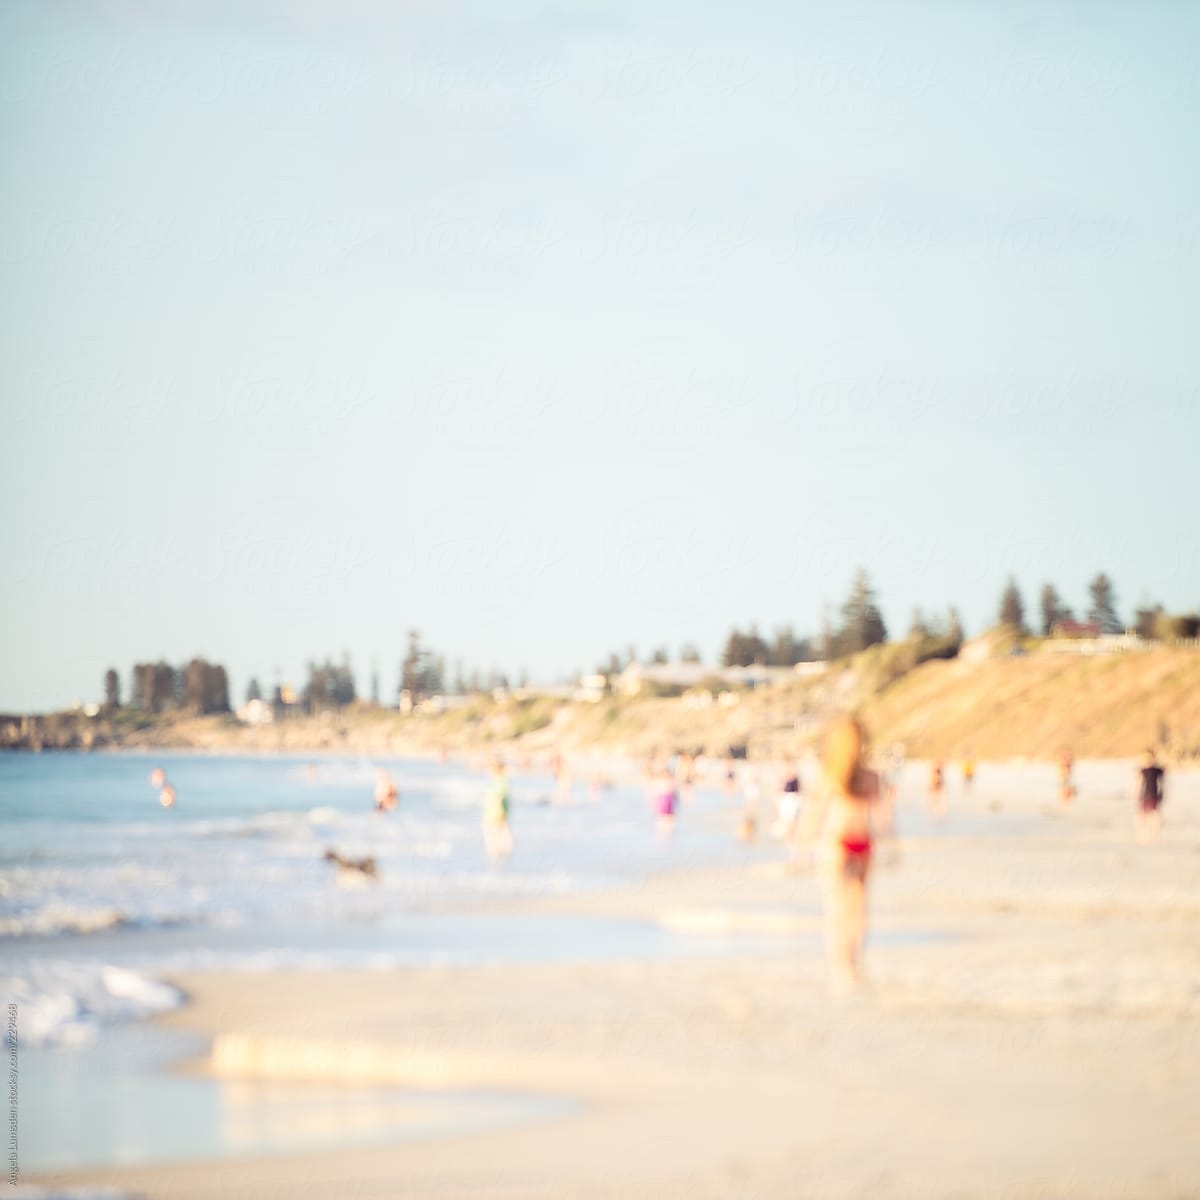 Defocused image of a busy beach in late afternoon